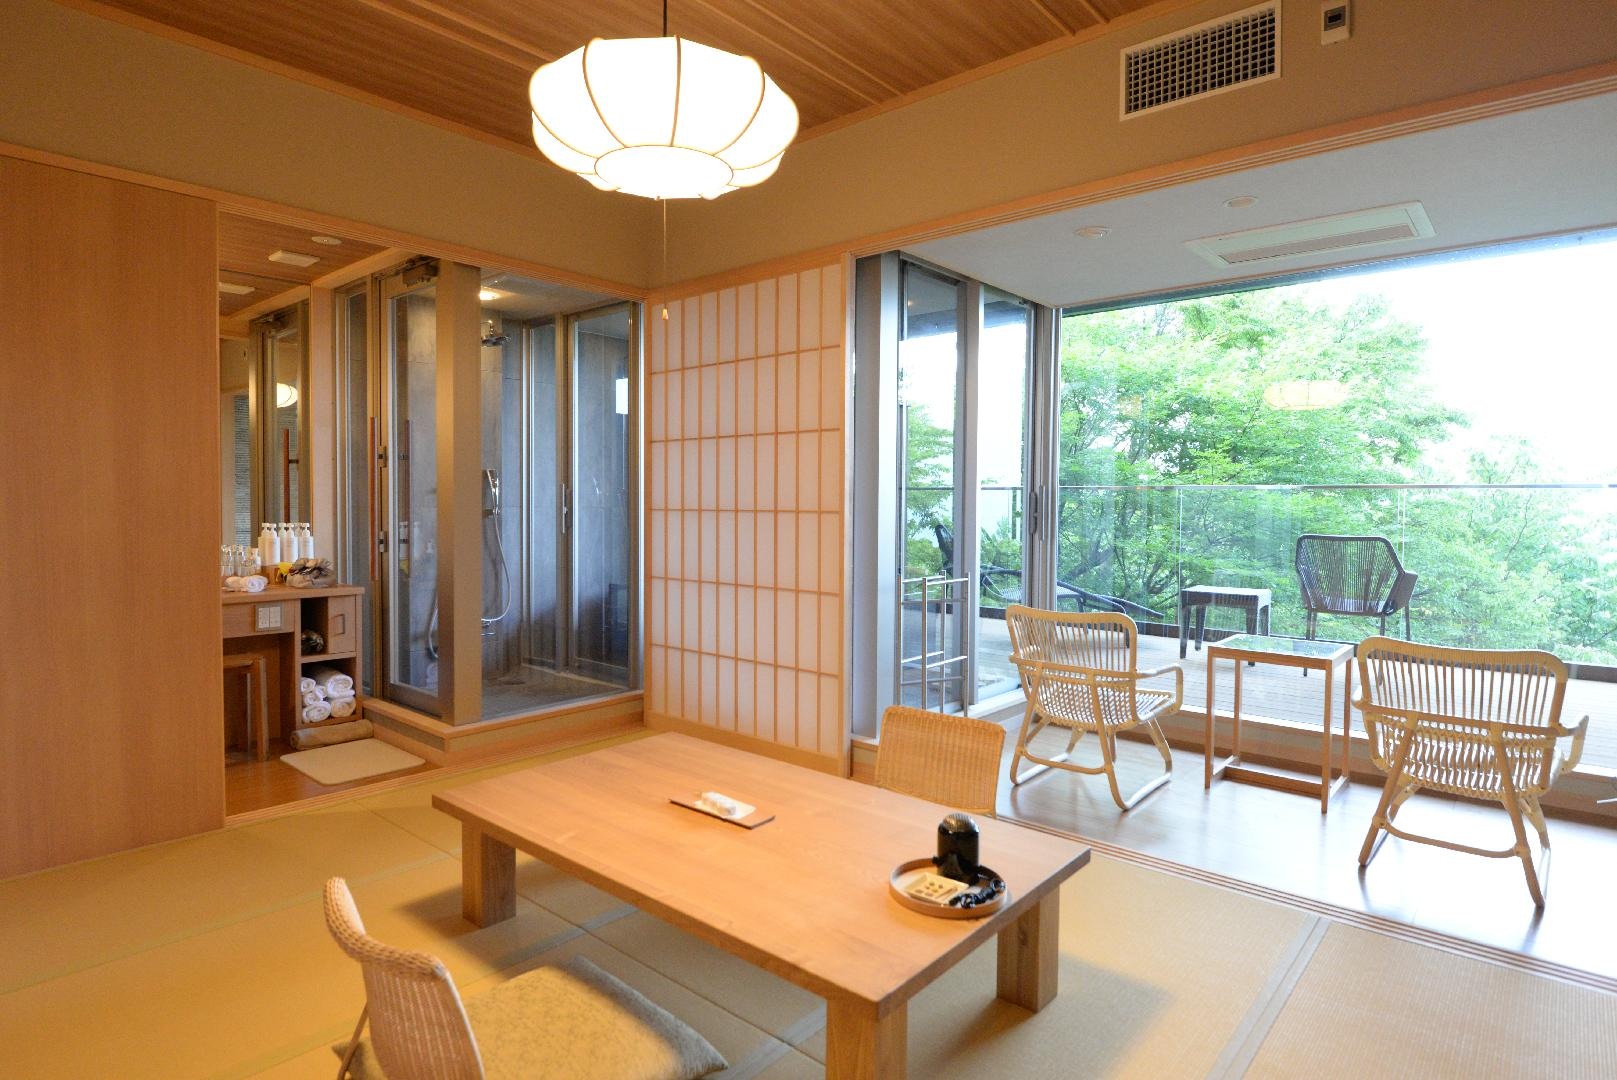 Japanese-style room 10 tatami mats with wide rim + nature garden view deck